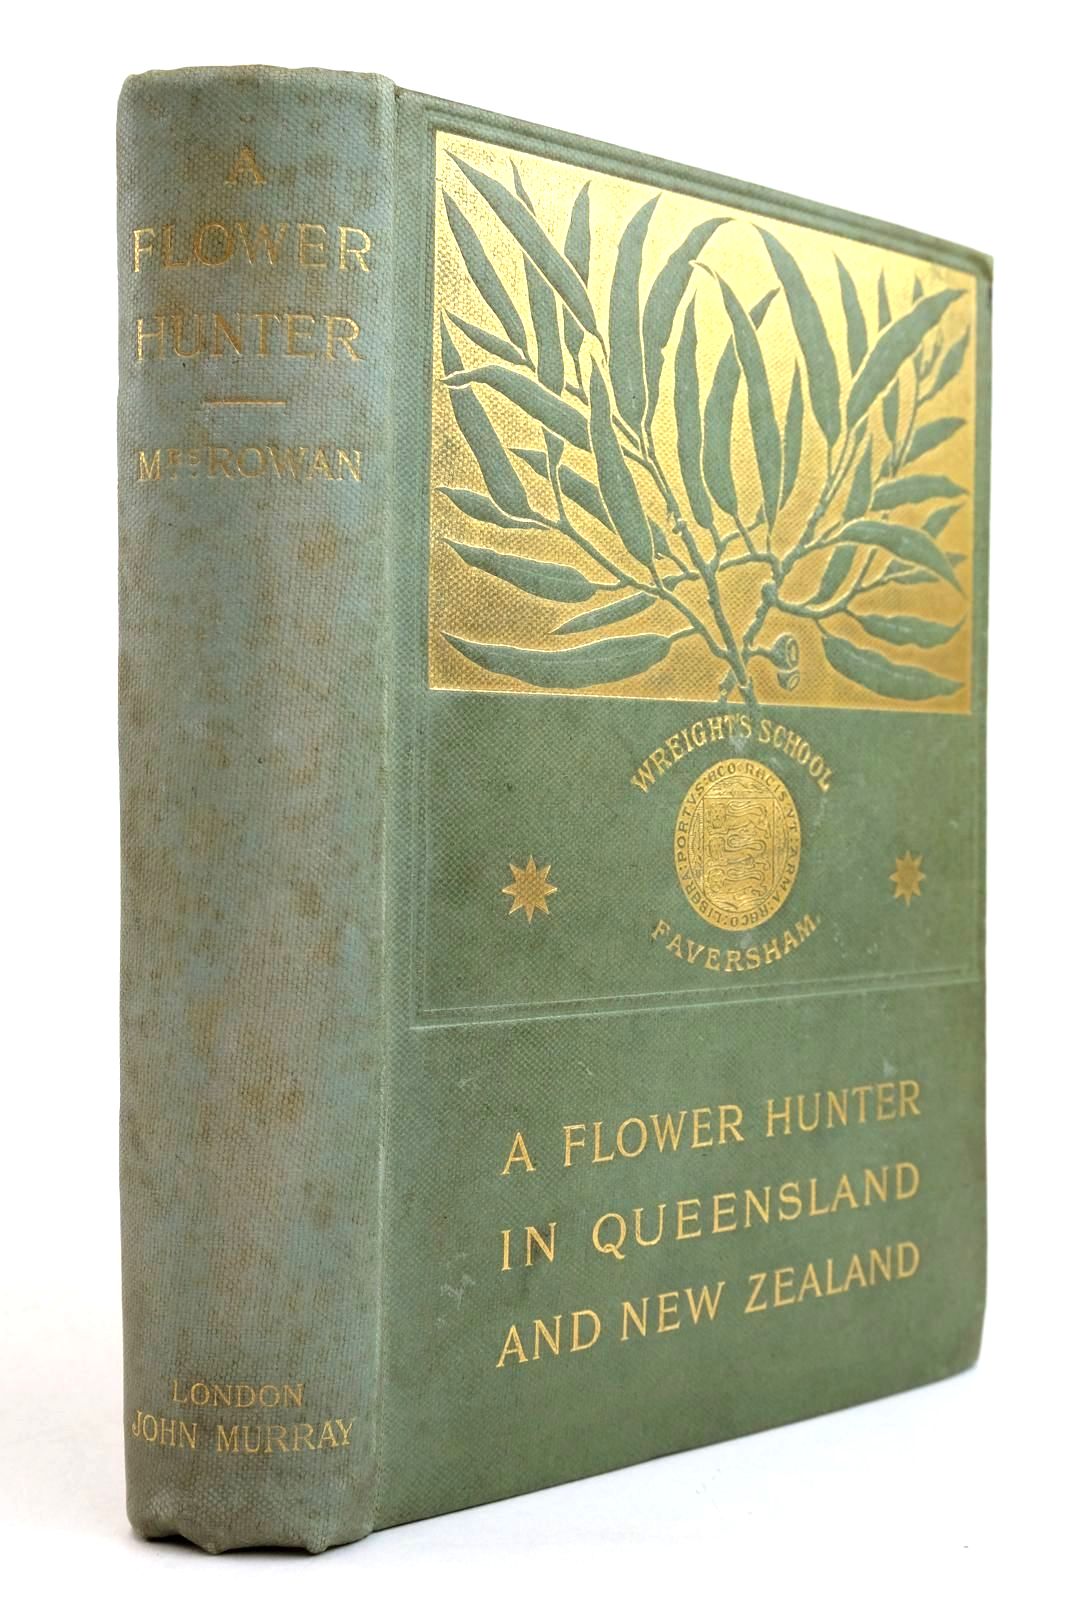 Photo of A FLOWER-HUNTER IN QUEENSLAND & NEW ZEALAND- Stock Number: 2134444